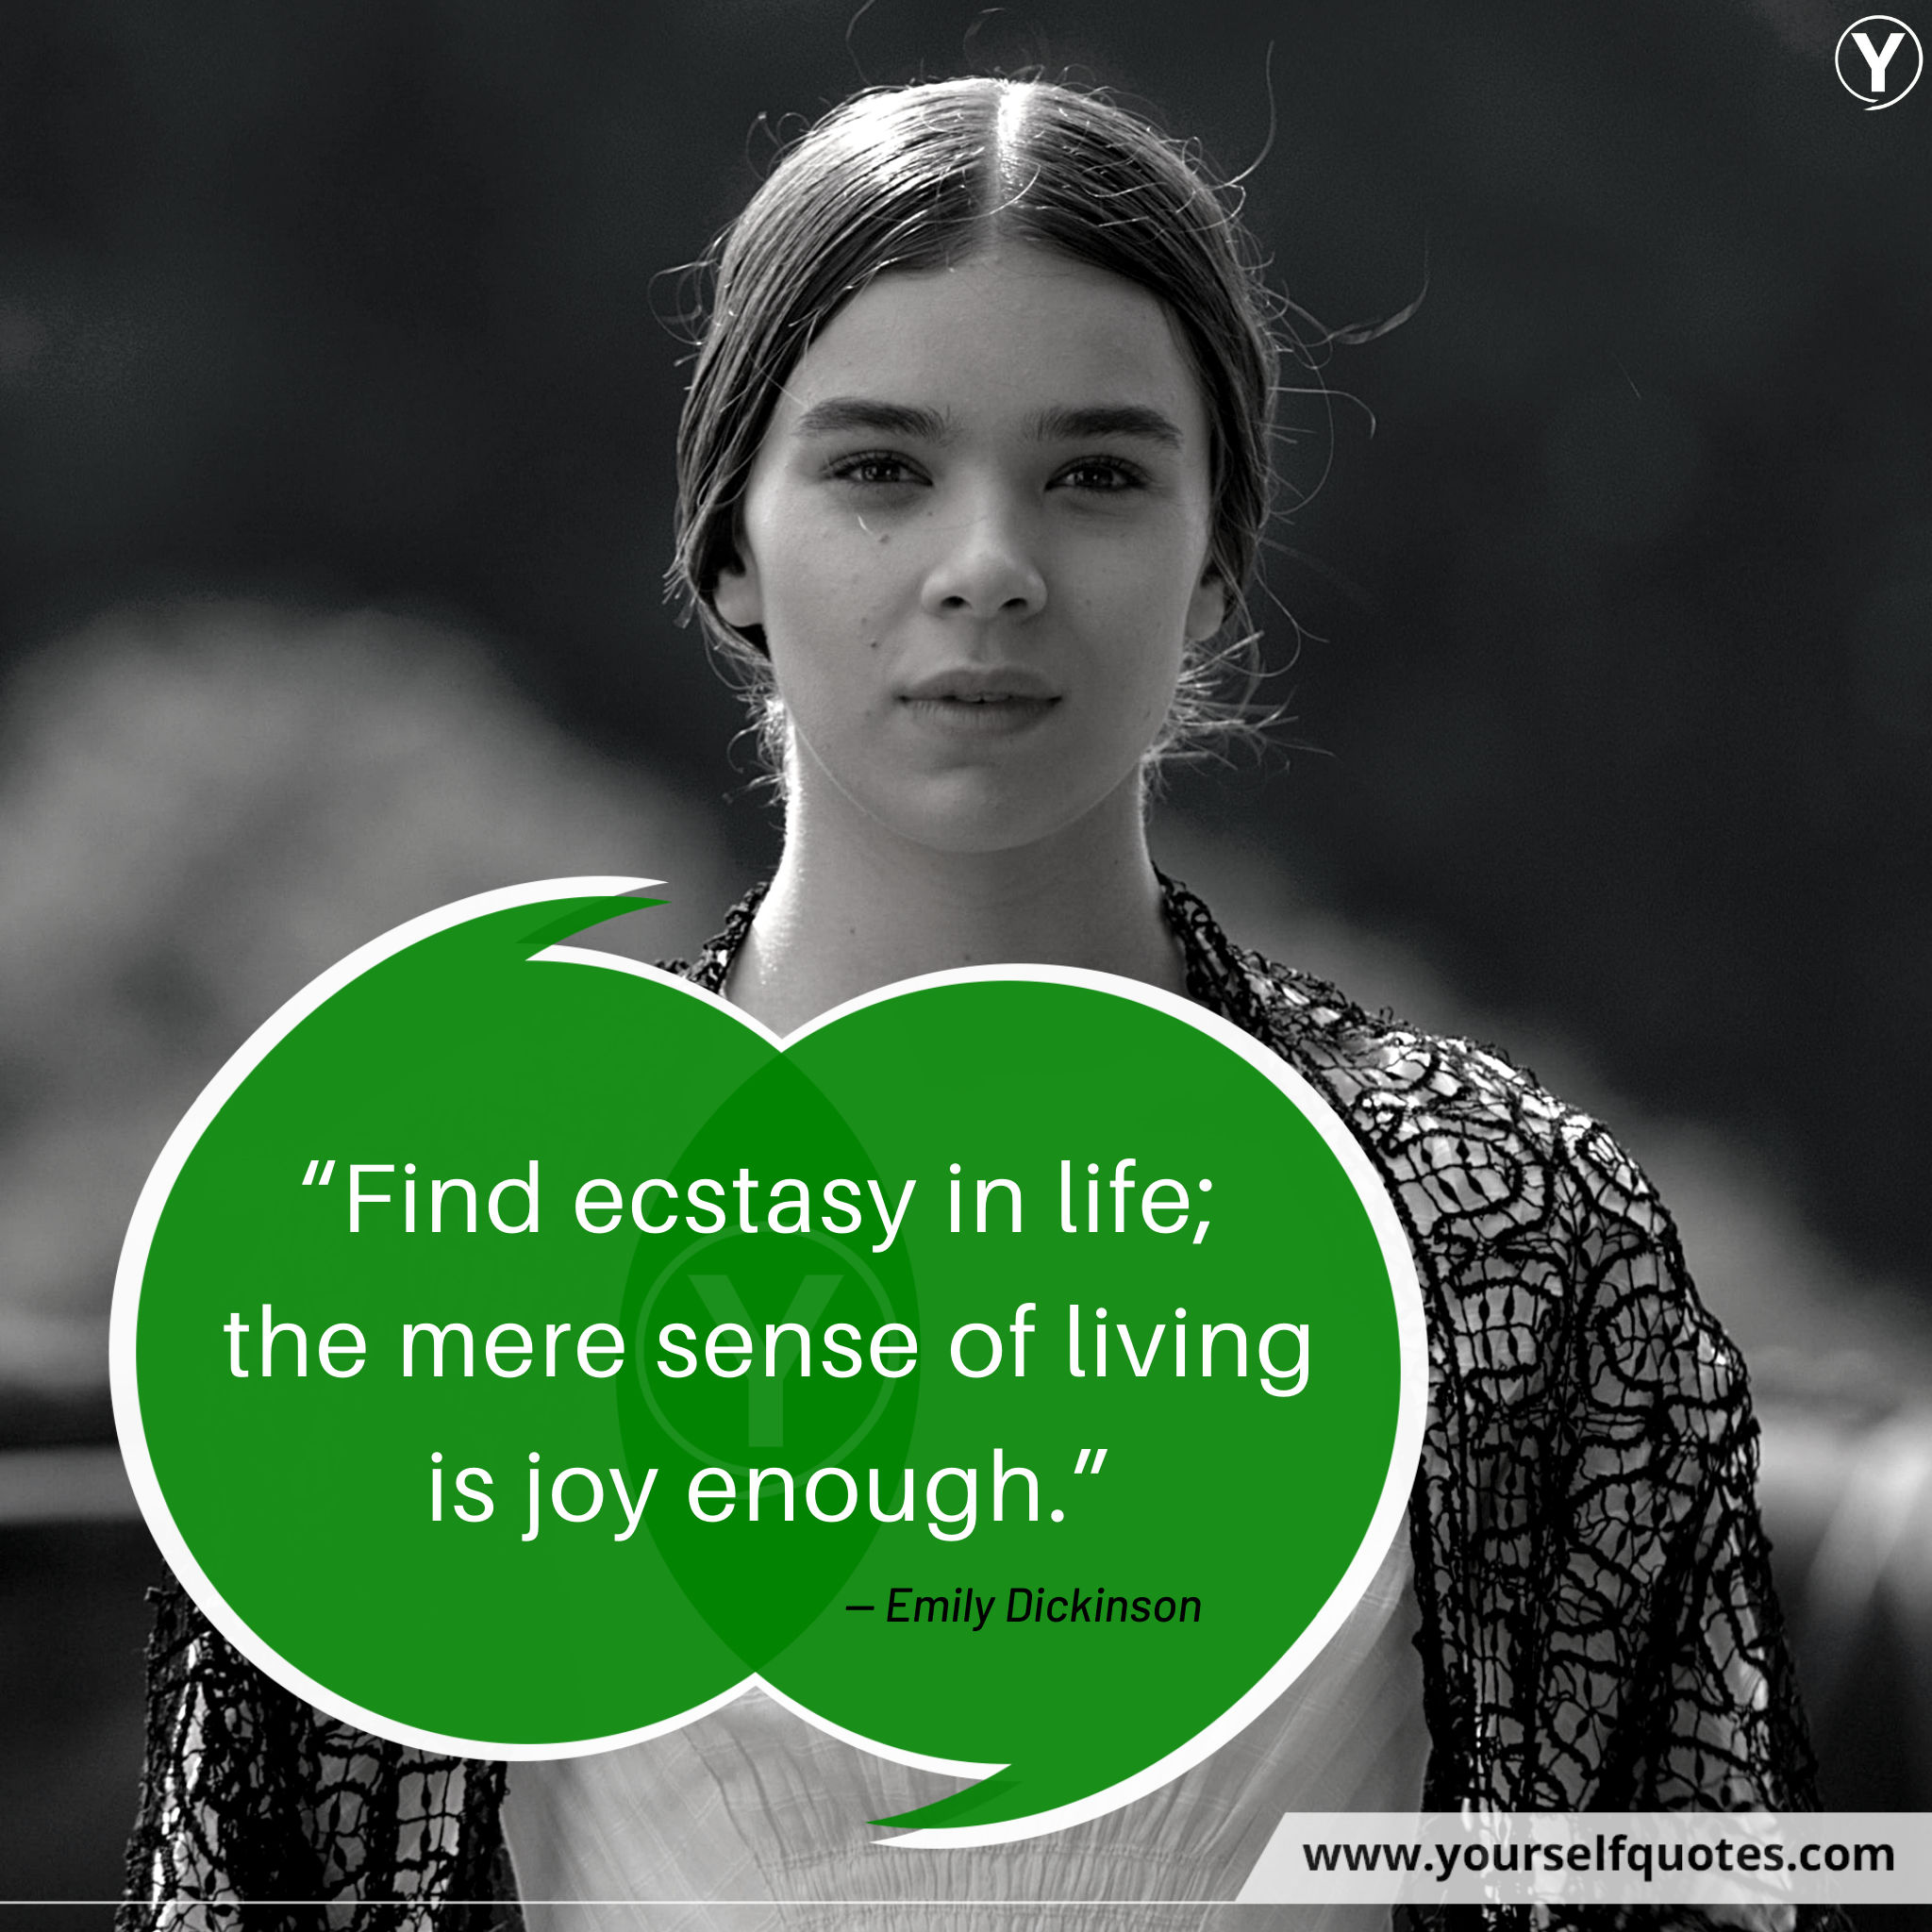 Quotes-on-Life-by-Emily-Dickinson